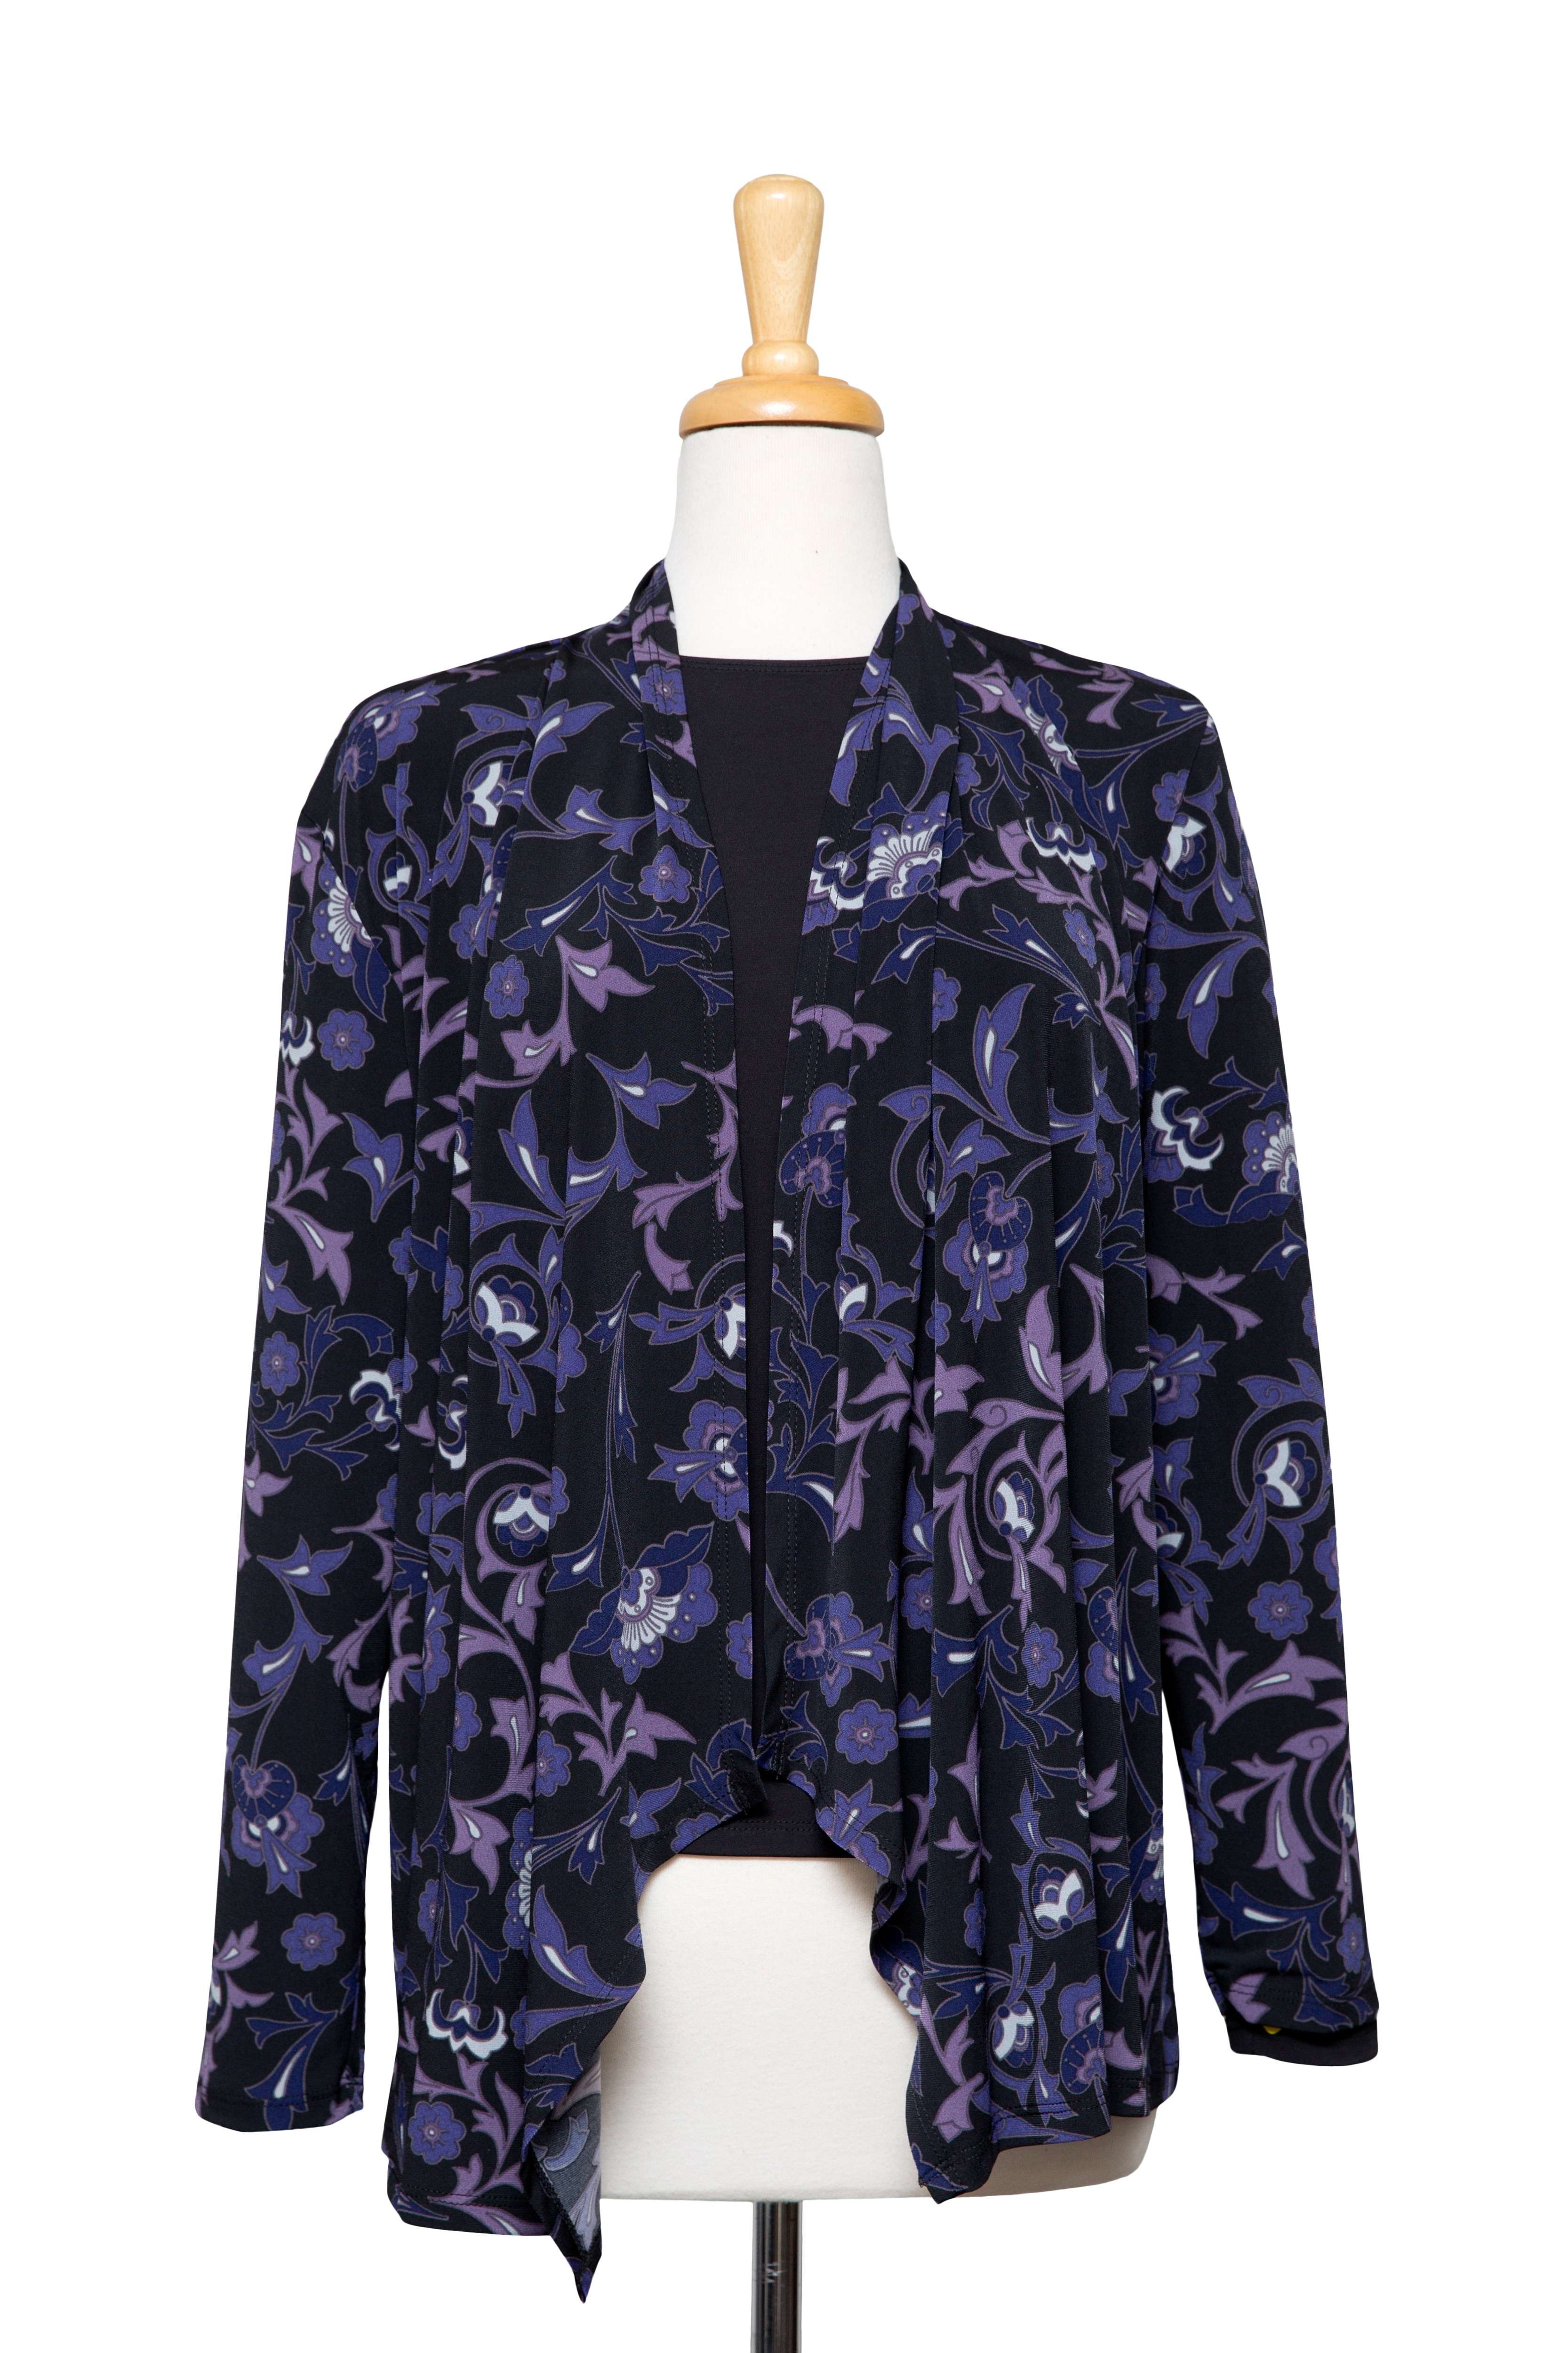 Plus Size Two Piece Black and Shades of Purple Floral Microfiber Shawl Collar  Set